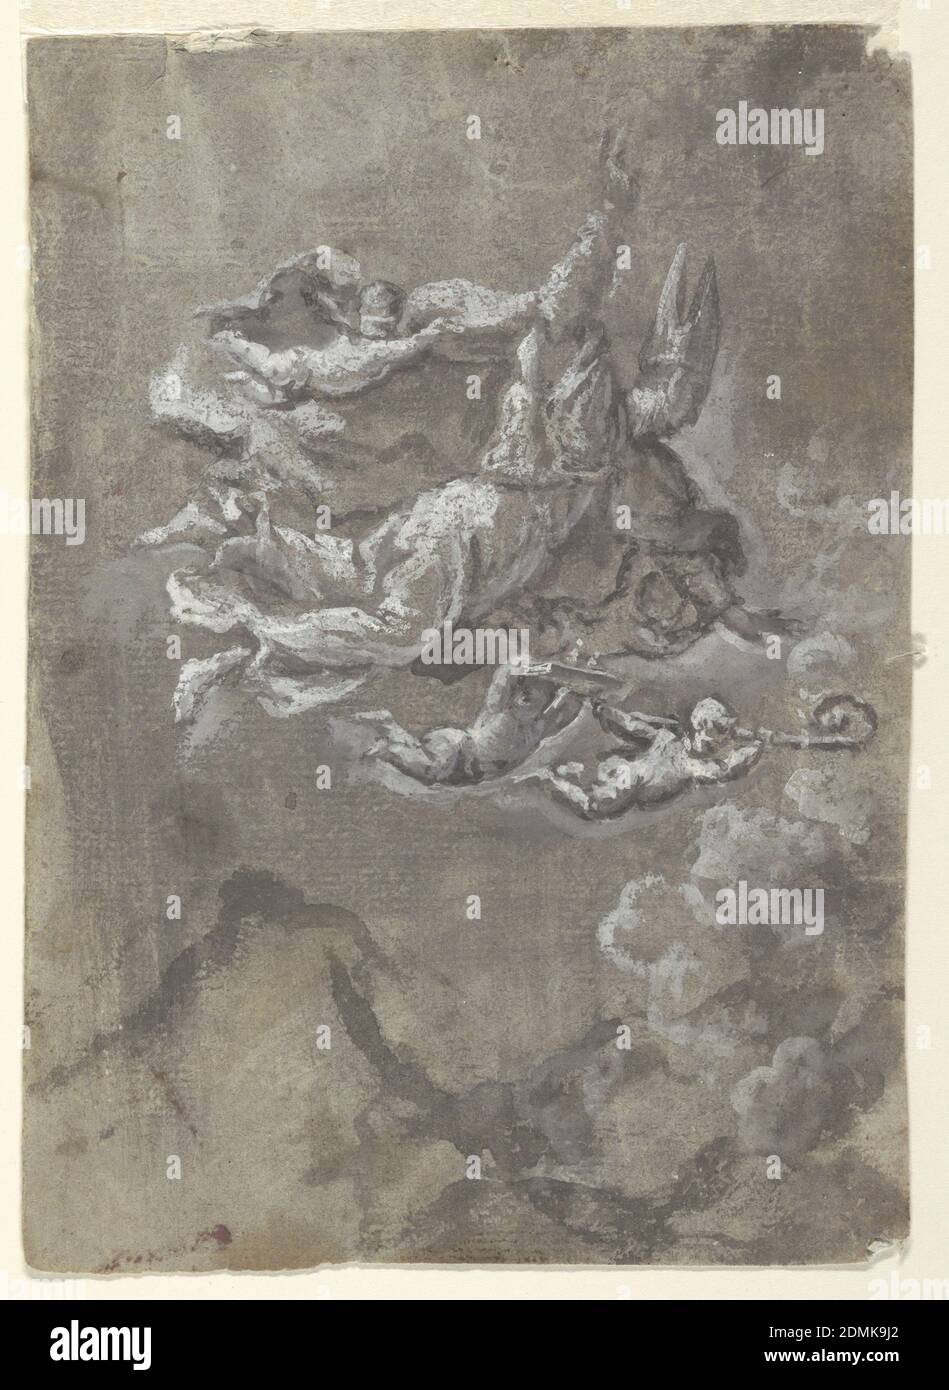 Saint Gennaro Calming Vesuvius, Andrea Vaccaro, Italian, 1604 - 1670, Brush and gray, white wash on paper, Figure of Saint Gennaro at center, flying over Mount Vesuvius with winged putti around him. The putto above him is holding his robe, the putto to the bottom right is holding a book, and the one to the bottom left is holding his crozier., Italy, 17th century, figures, Drawing Stock Photo